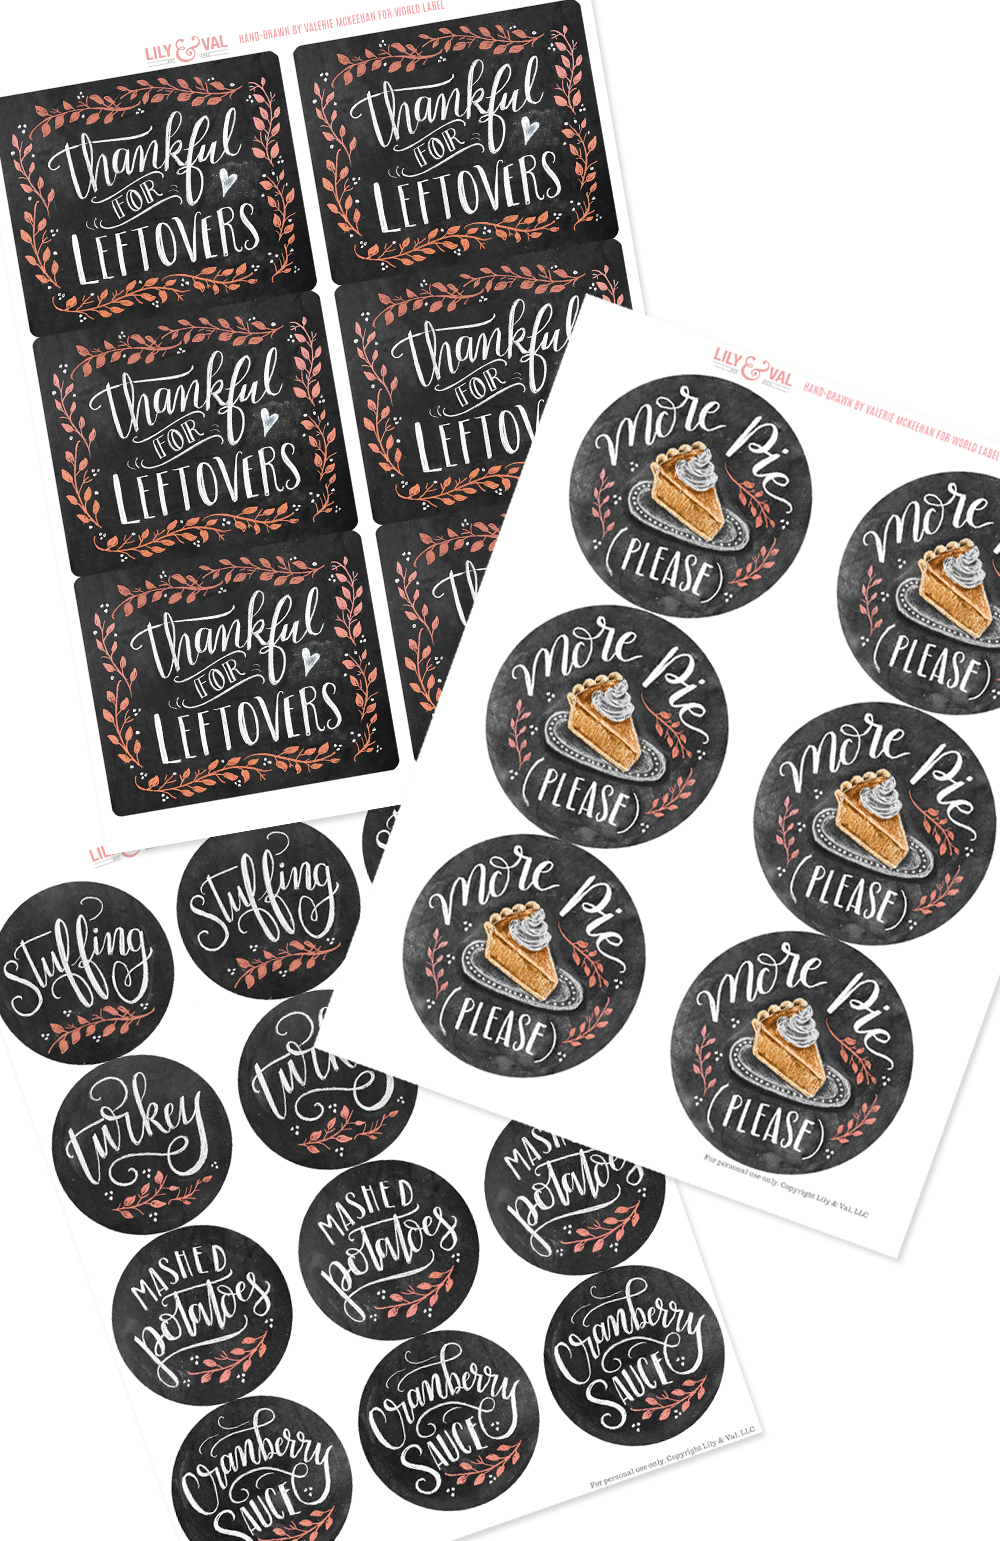 Thanksgiving Leftover labels- a free download by Lily & Val 